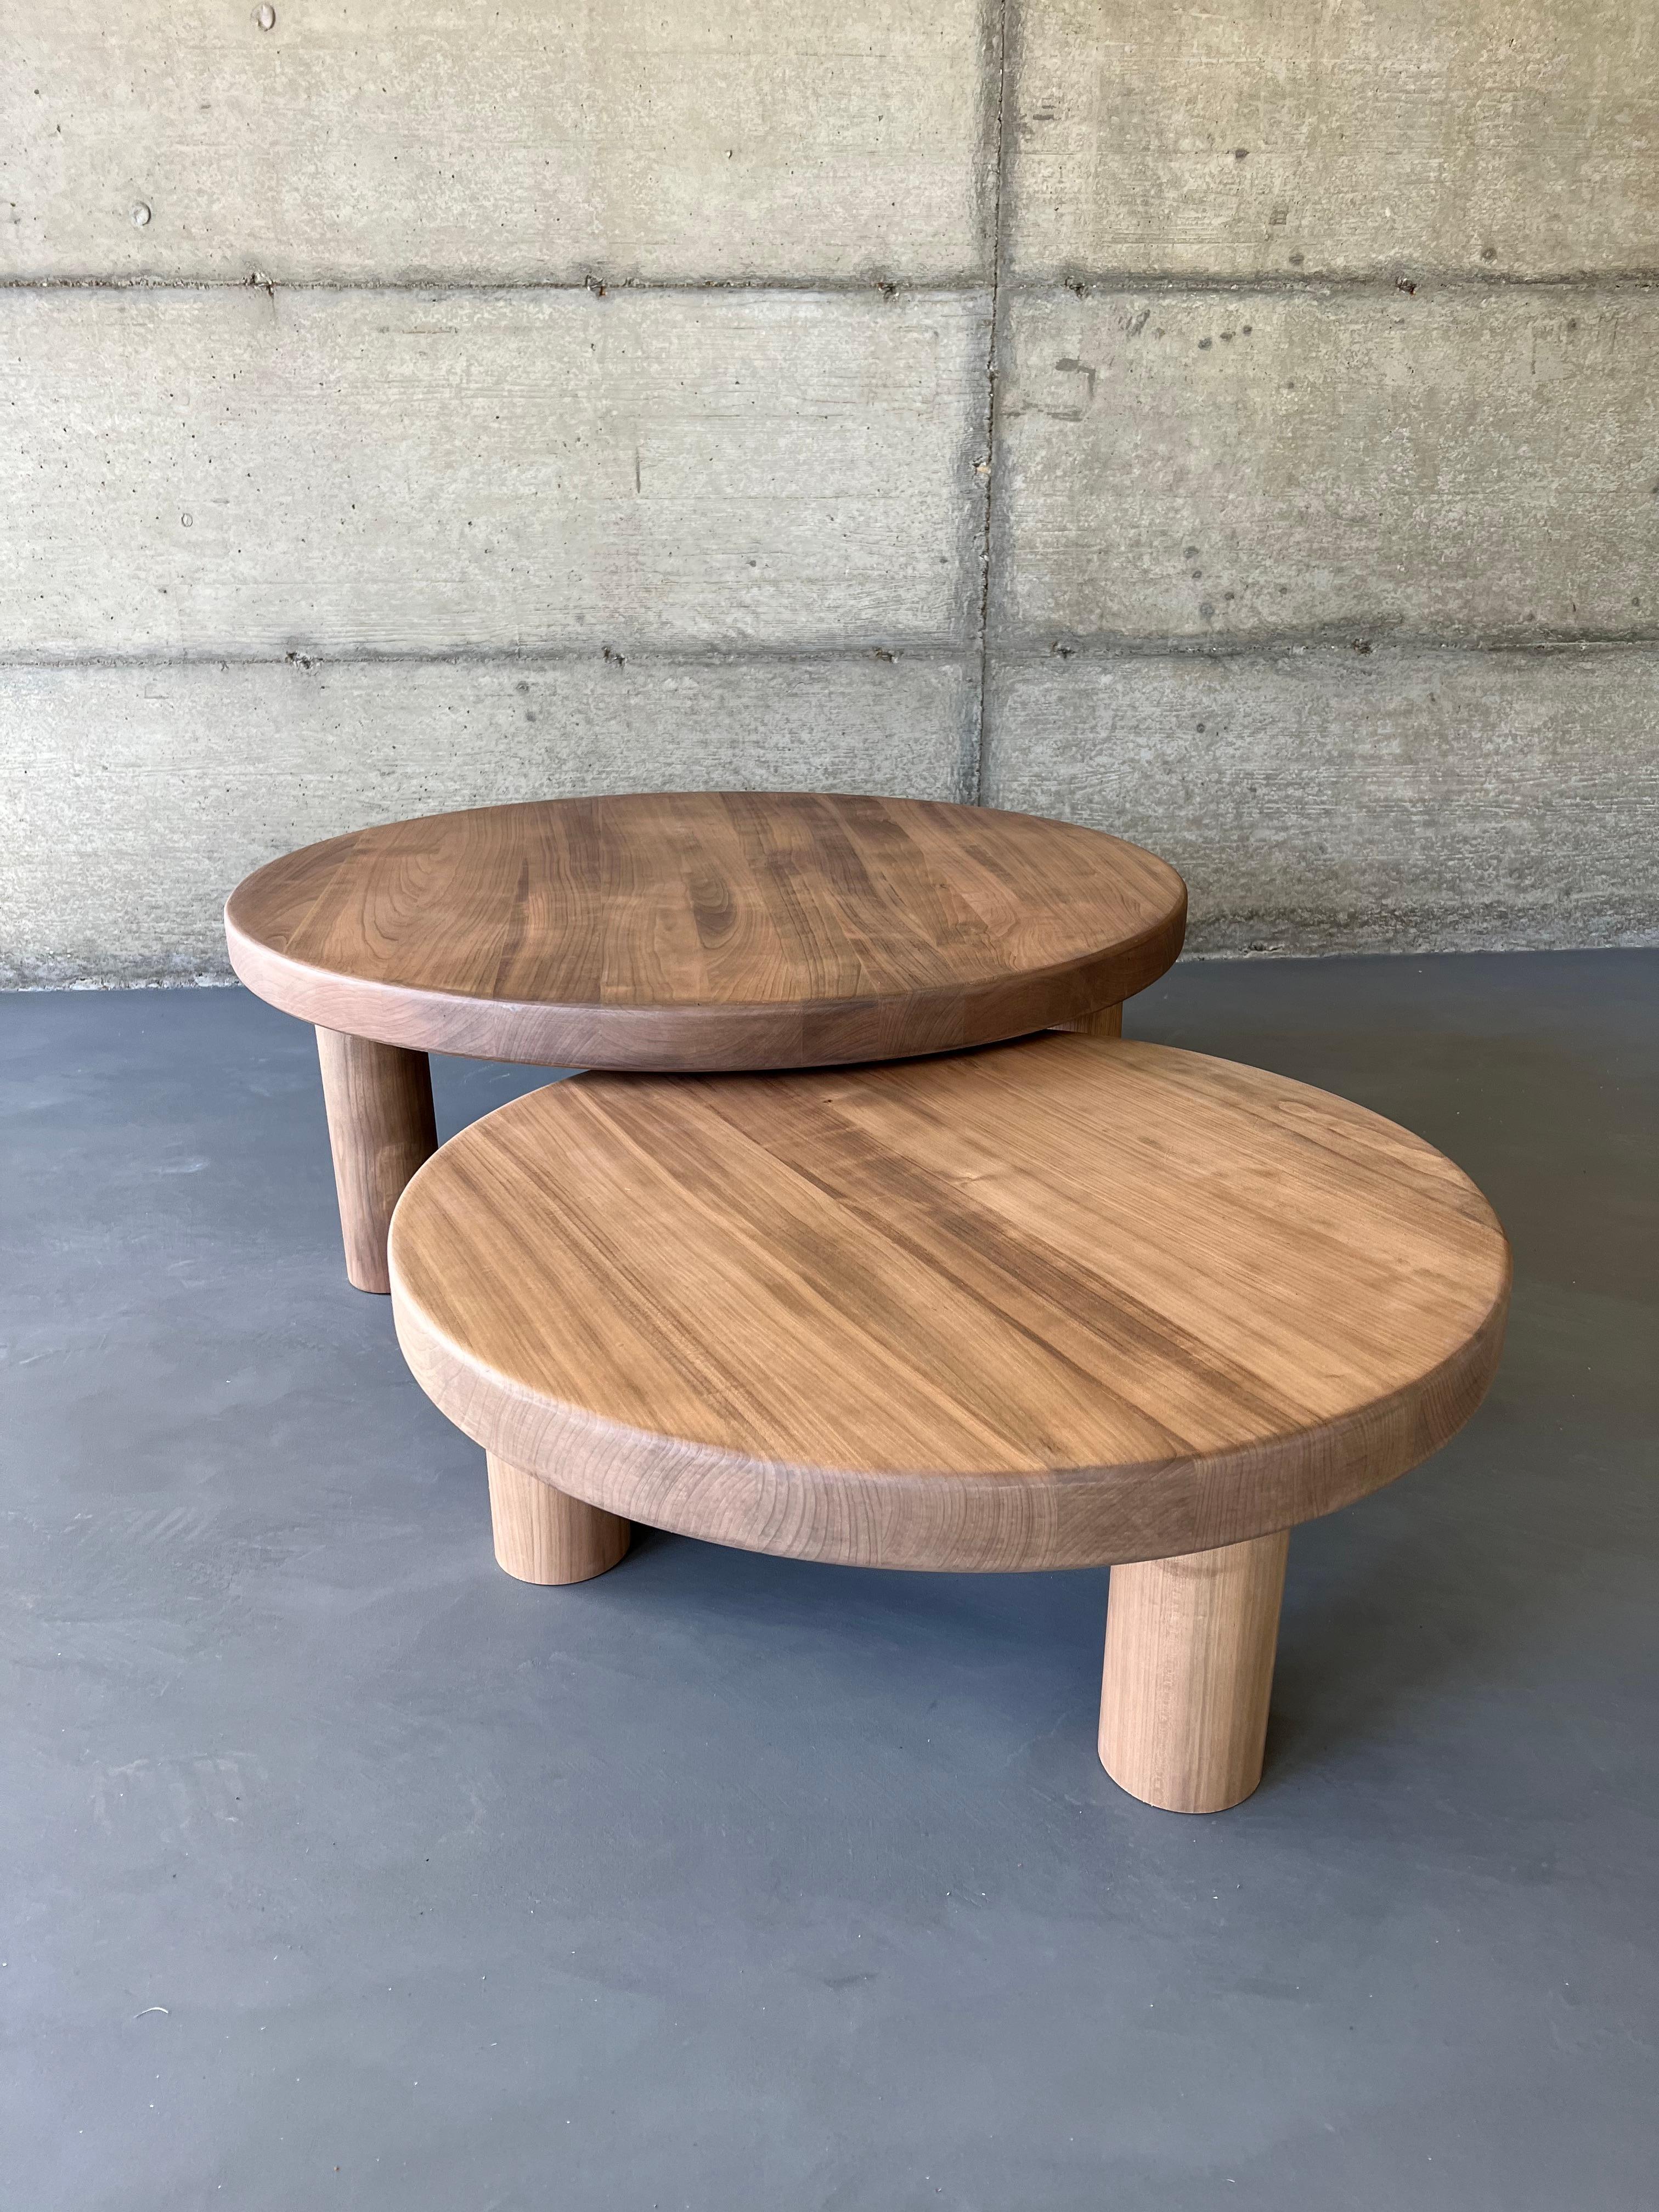 Duo of Mid-Century Style Coffee Tables in Solid Cherry Wood 8